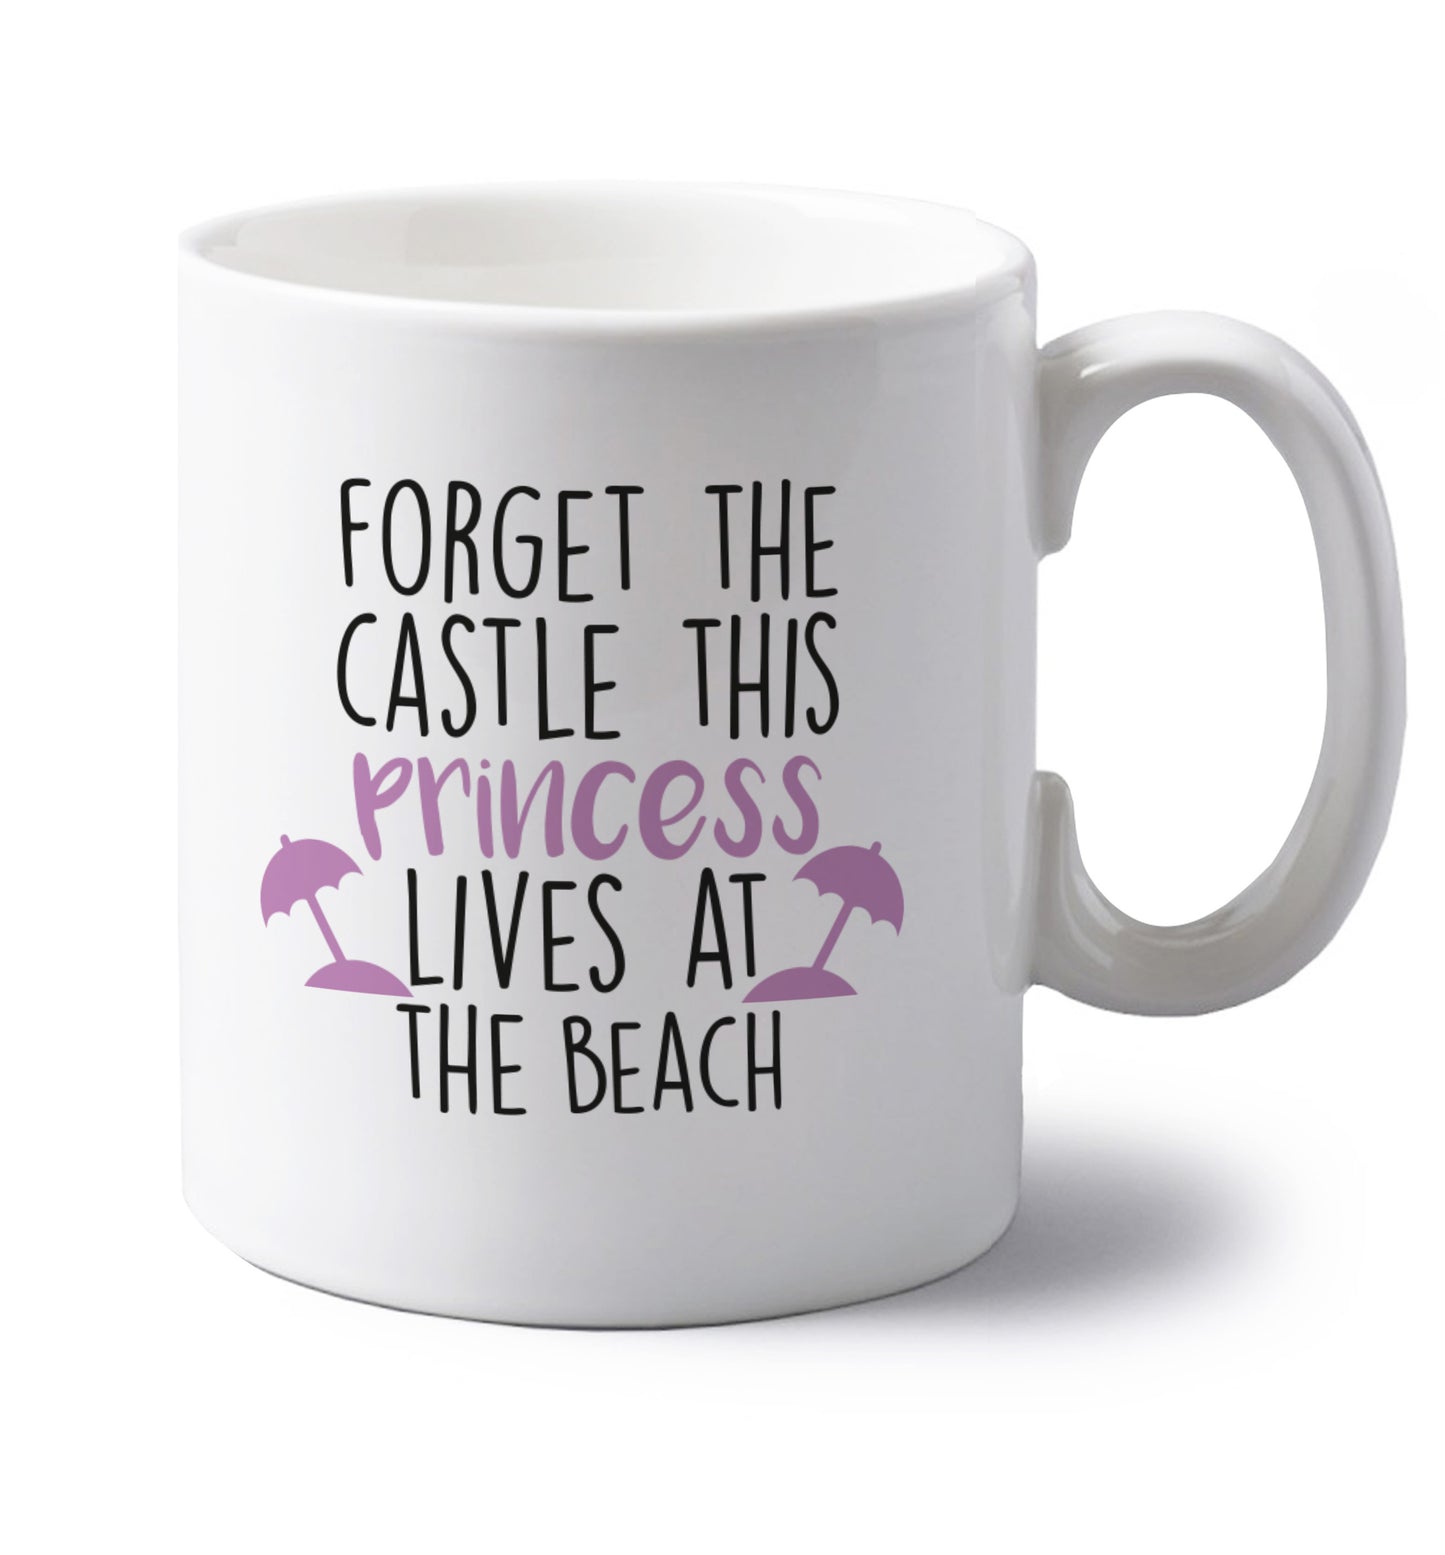 Forget the castle this princess lives at the beach left handed white ceramic mug 